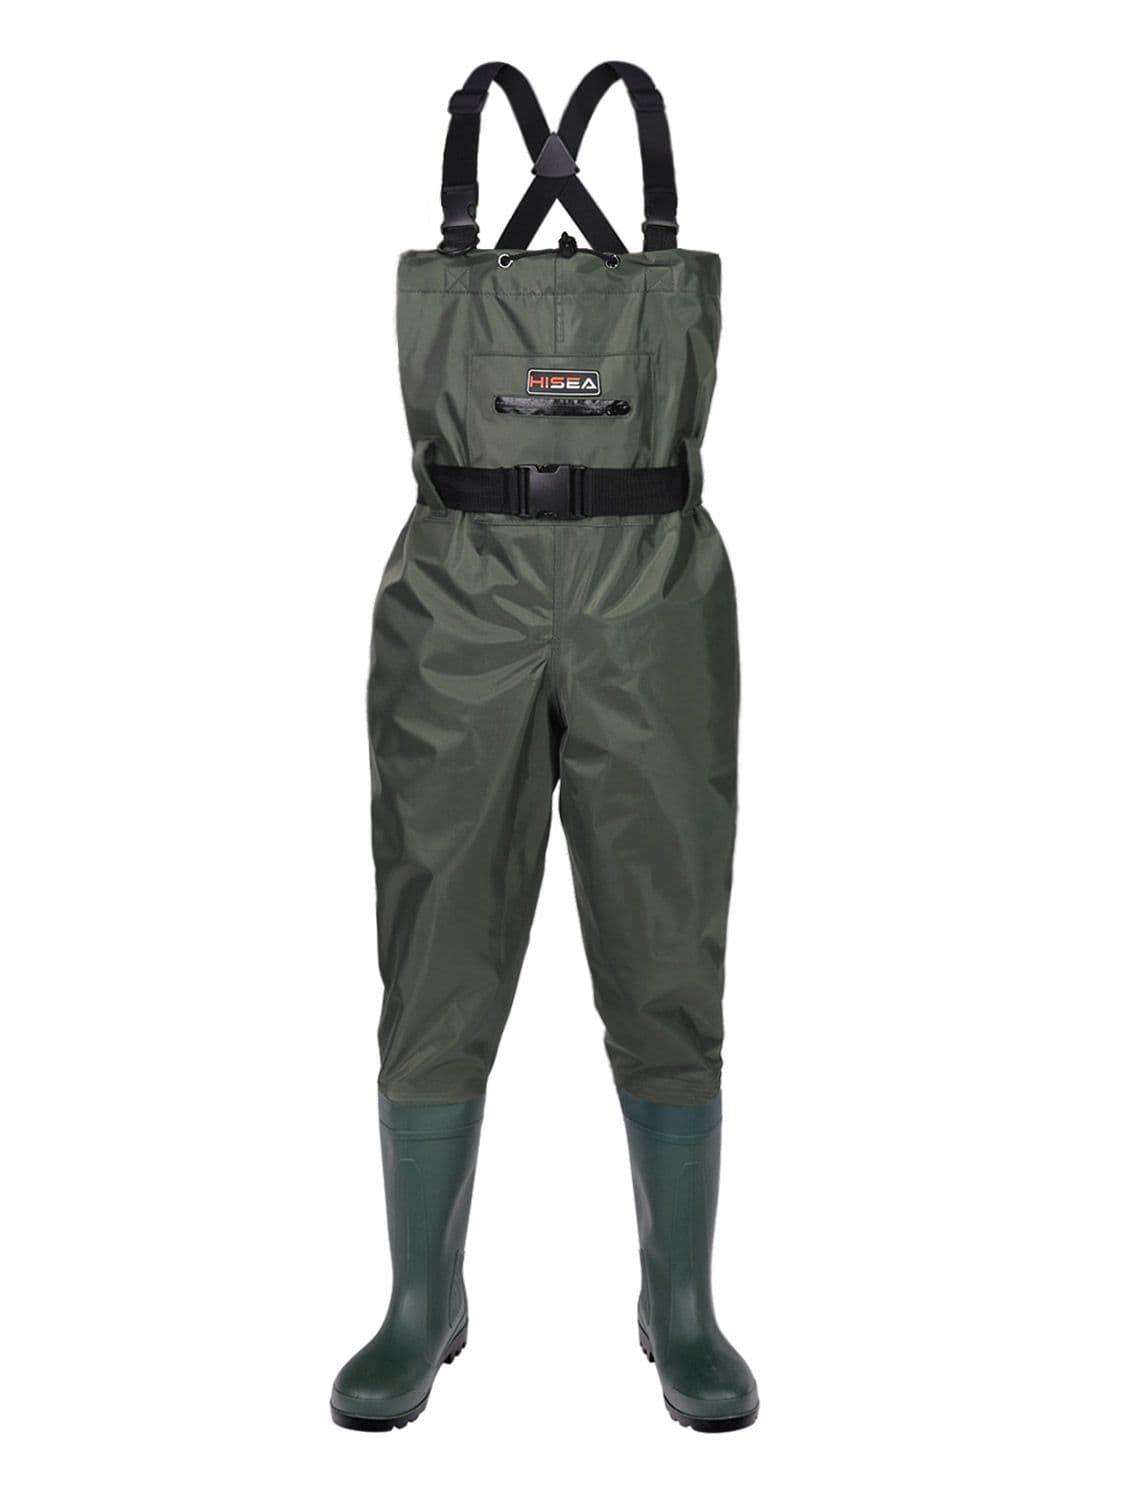 HISEA Chest Waders Neoprene Duck Hunting Waders for Men with